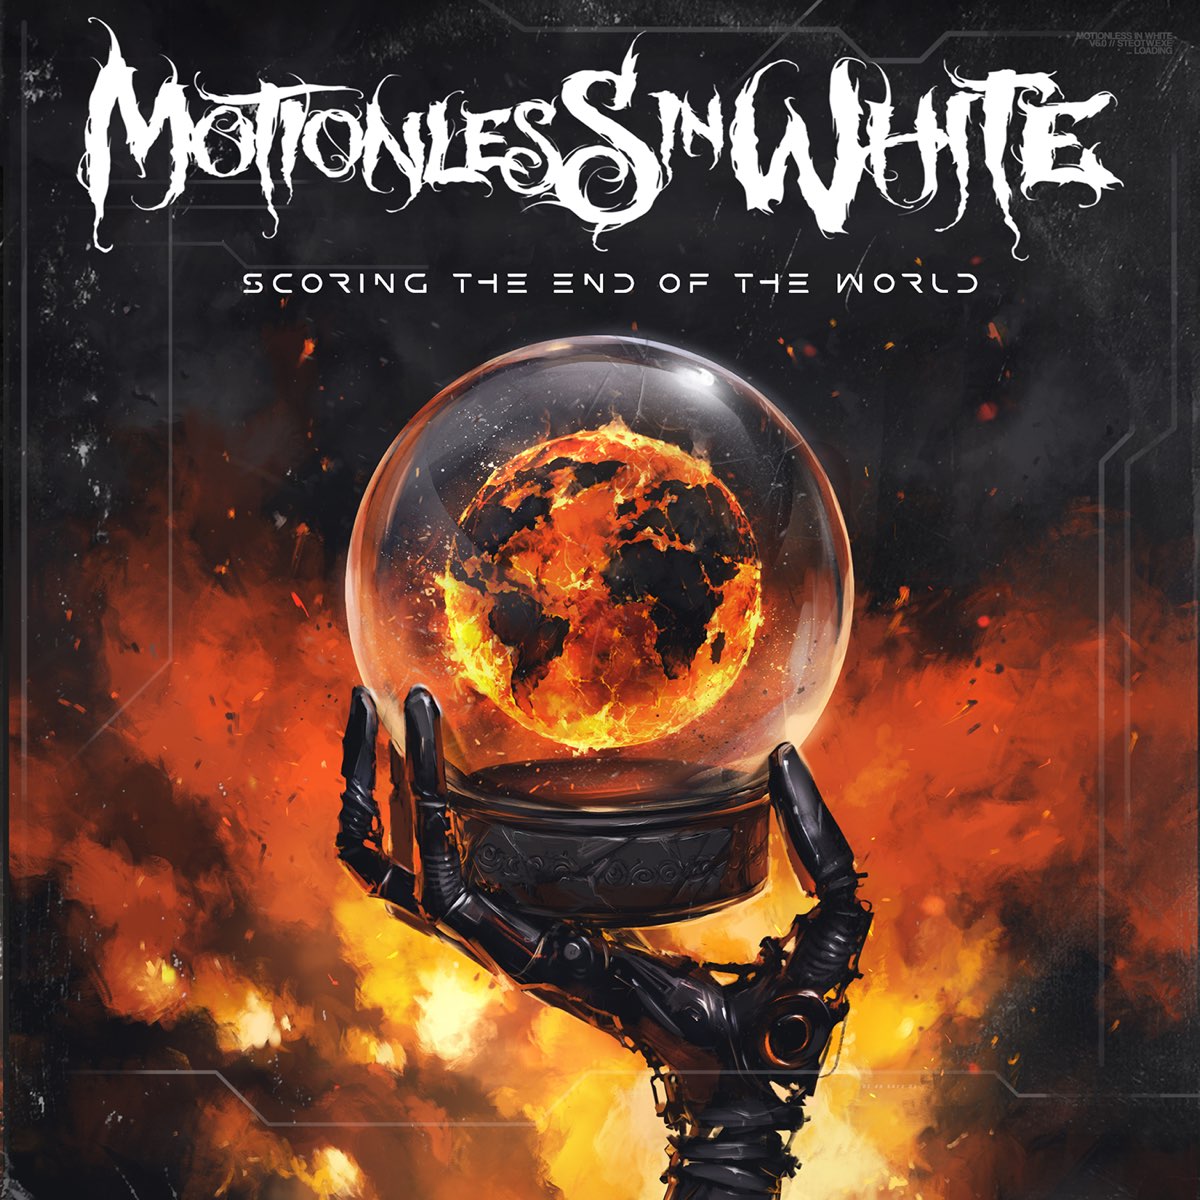 Scoring The End Of The World by Motionless In White on Apple Music